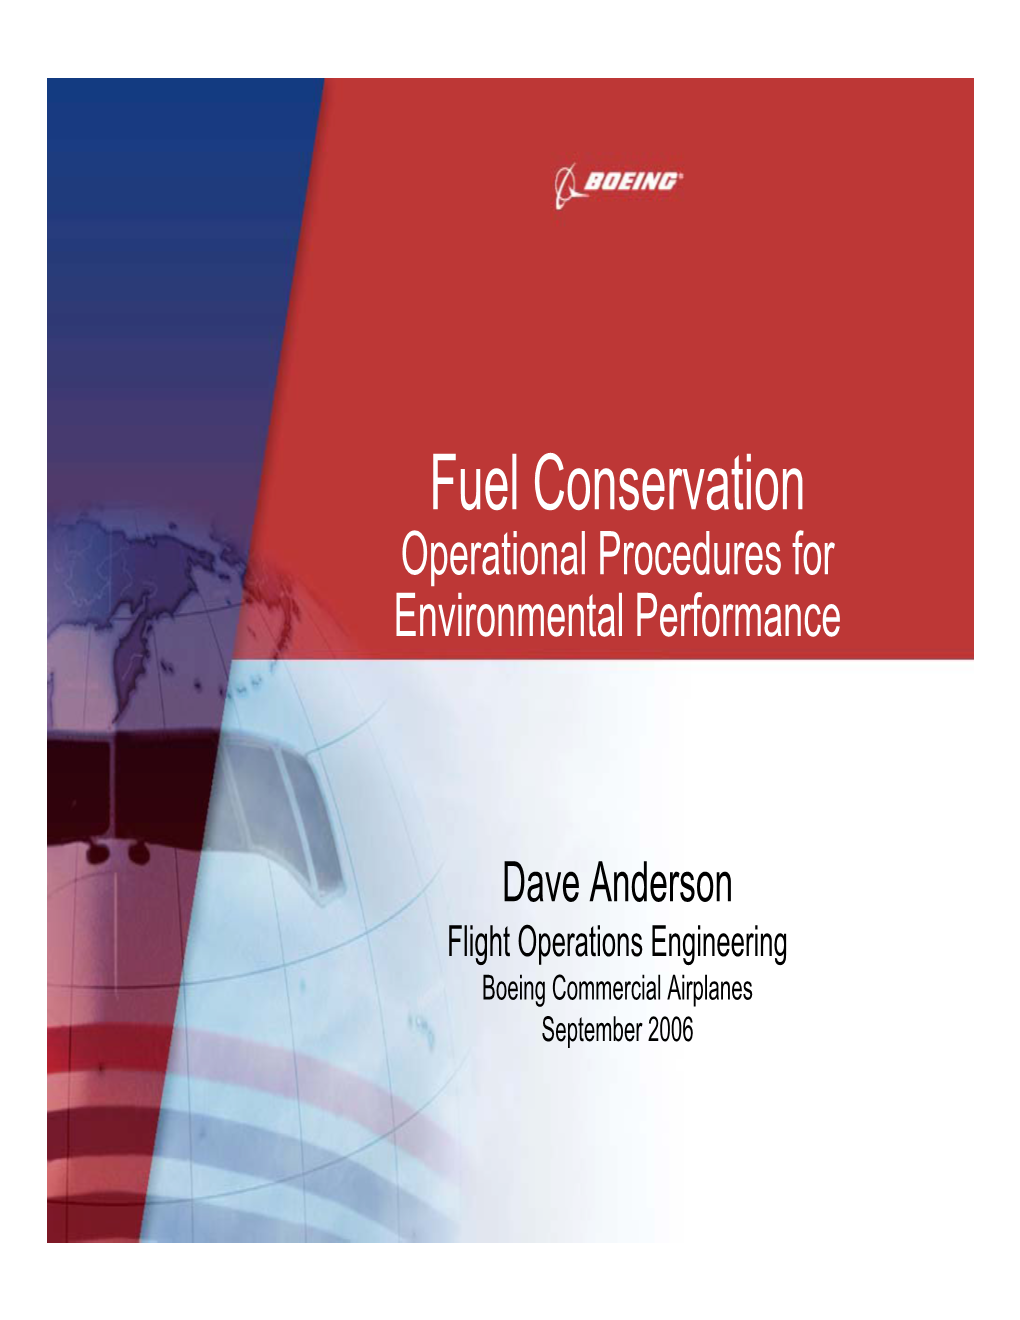 Fuel Conservation Operational Procedures for Environmental Performance